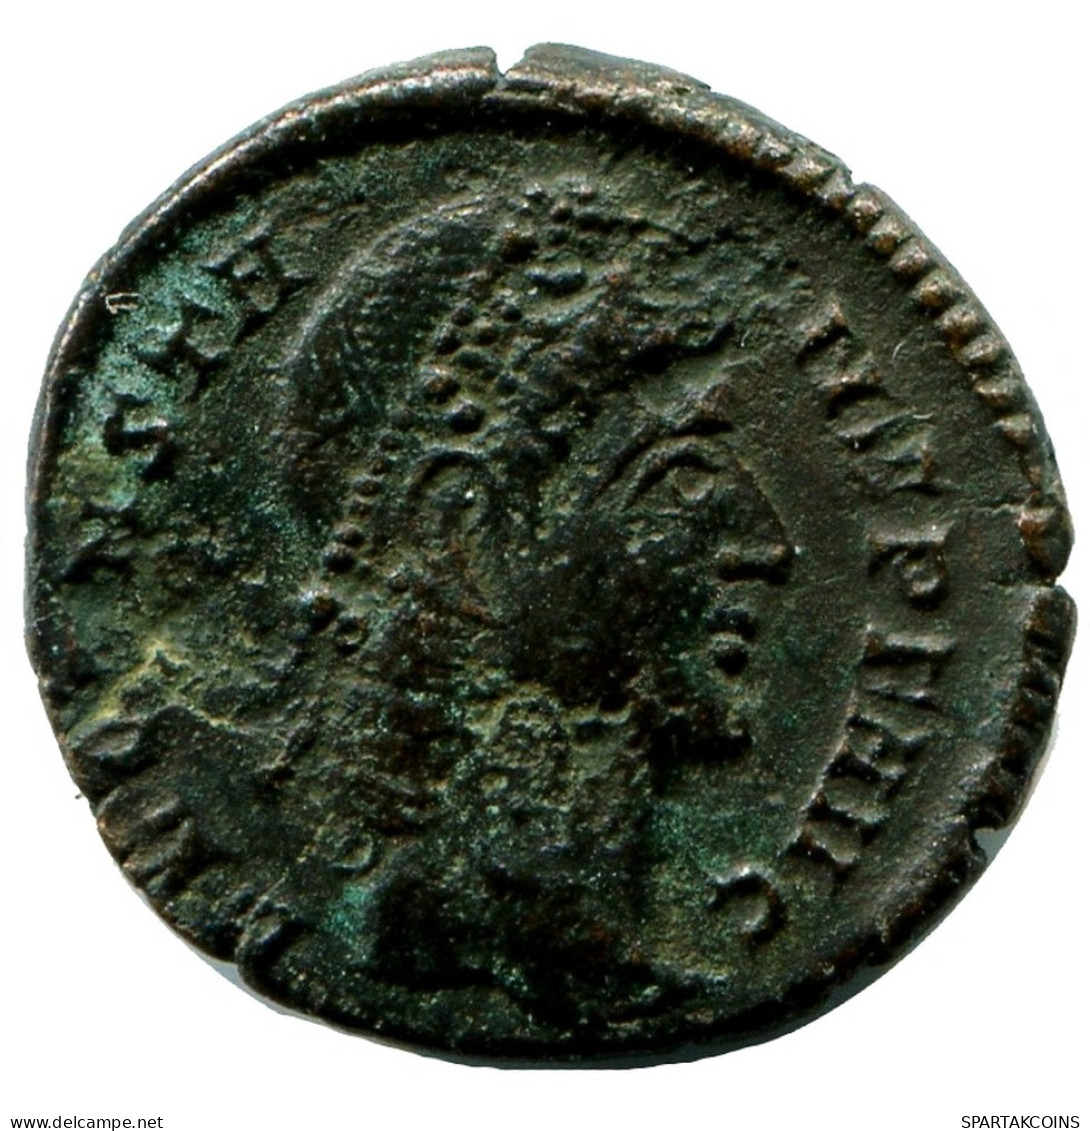 CONSTANS MINTED IN HERACLEA FROM THE ROYAL ONTARIO MUSEUM #ANC11564.14.E.A - L'Empire Chrétien (307 à 363)